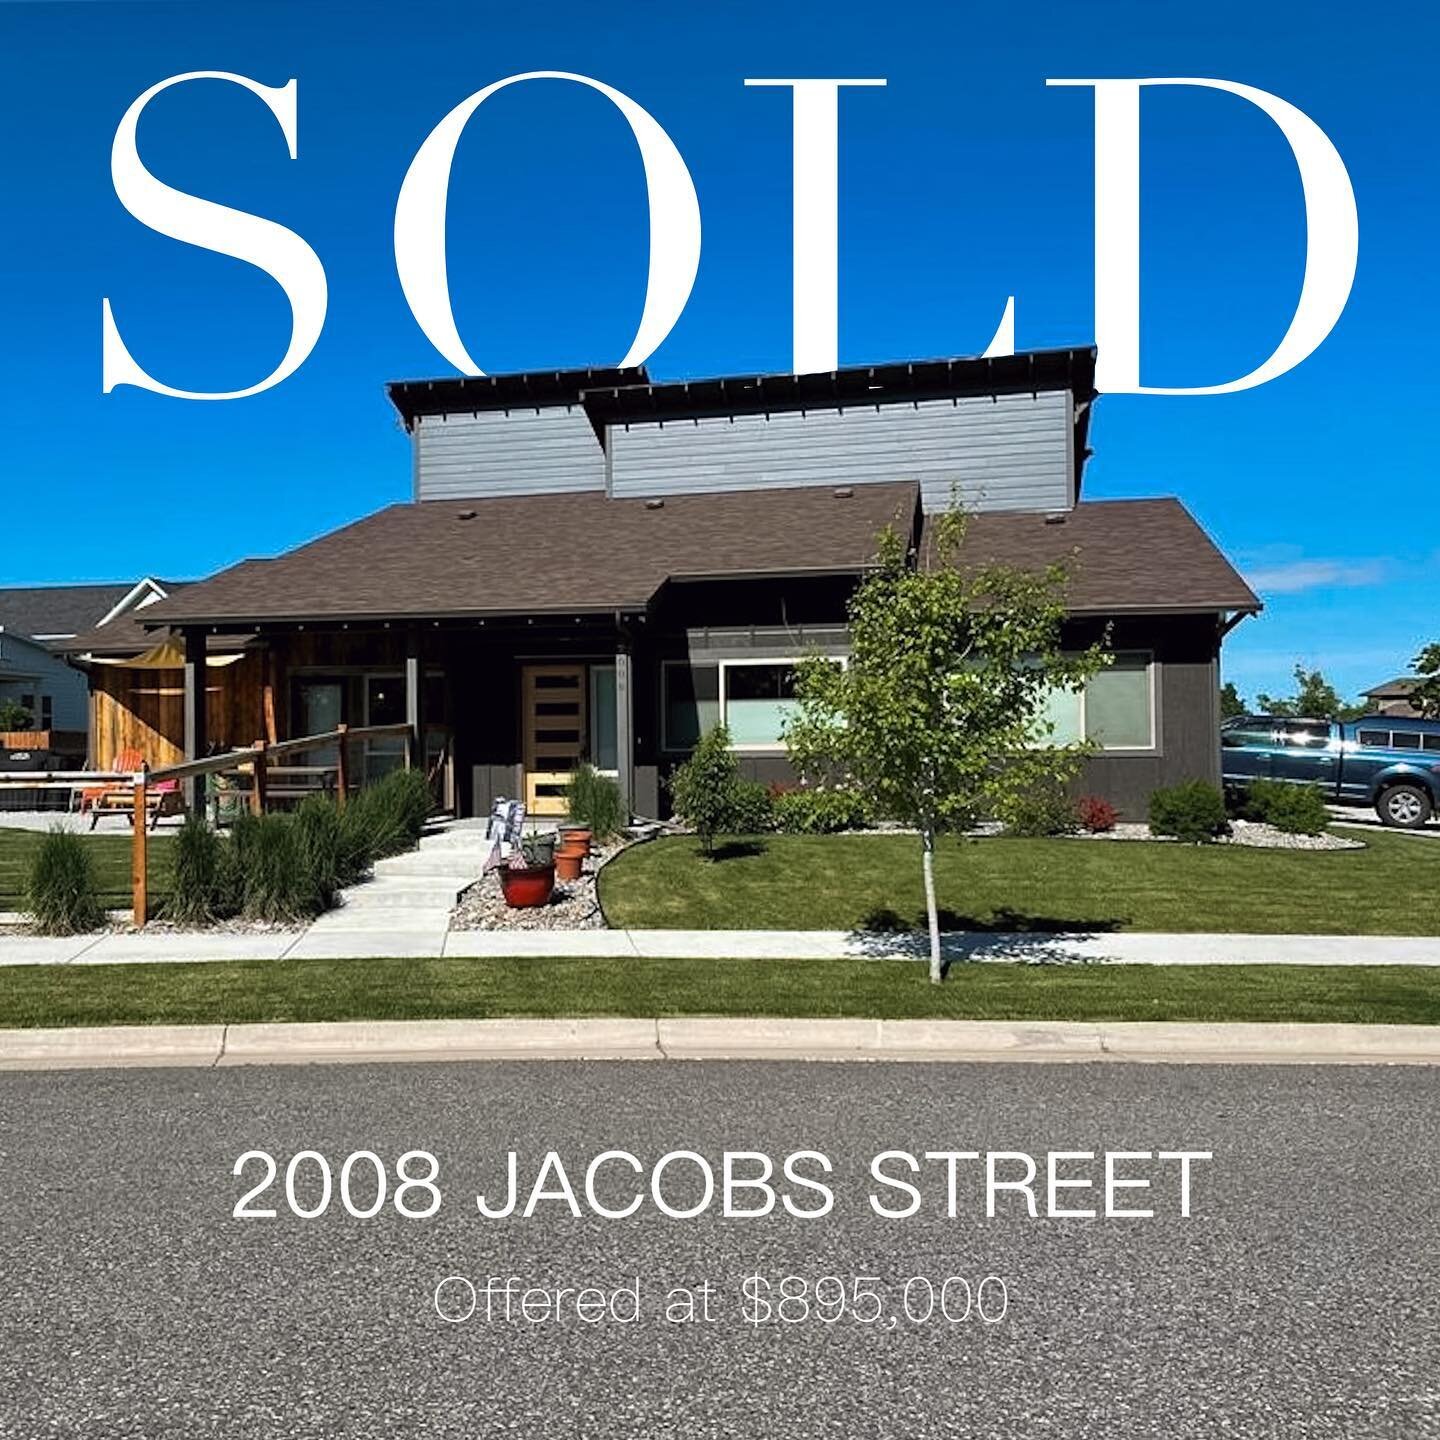 JUST SOLD | A contemporary Bozeman house in the Southbridge subdivision to an amazing buyer!

#bhhs #bozemanhomes #bozemanchamberofcommerce #bozemanmontana